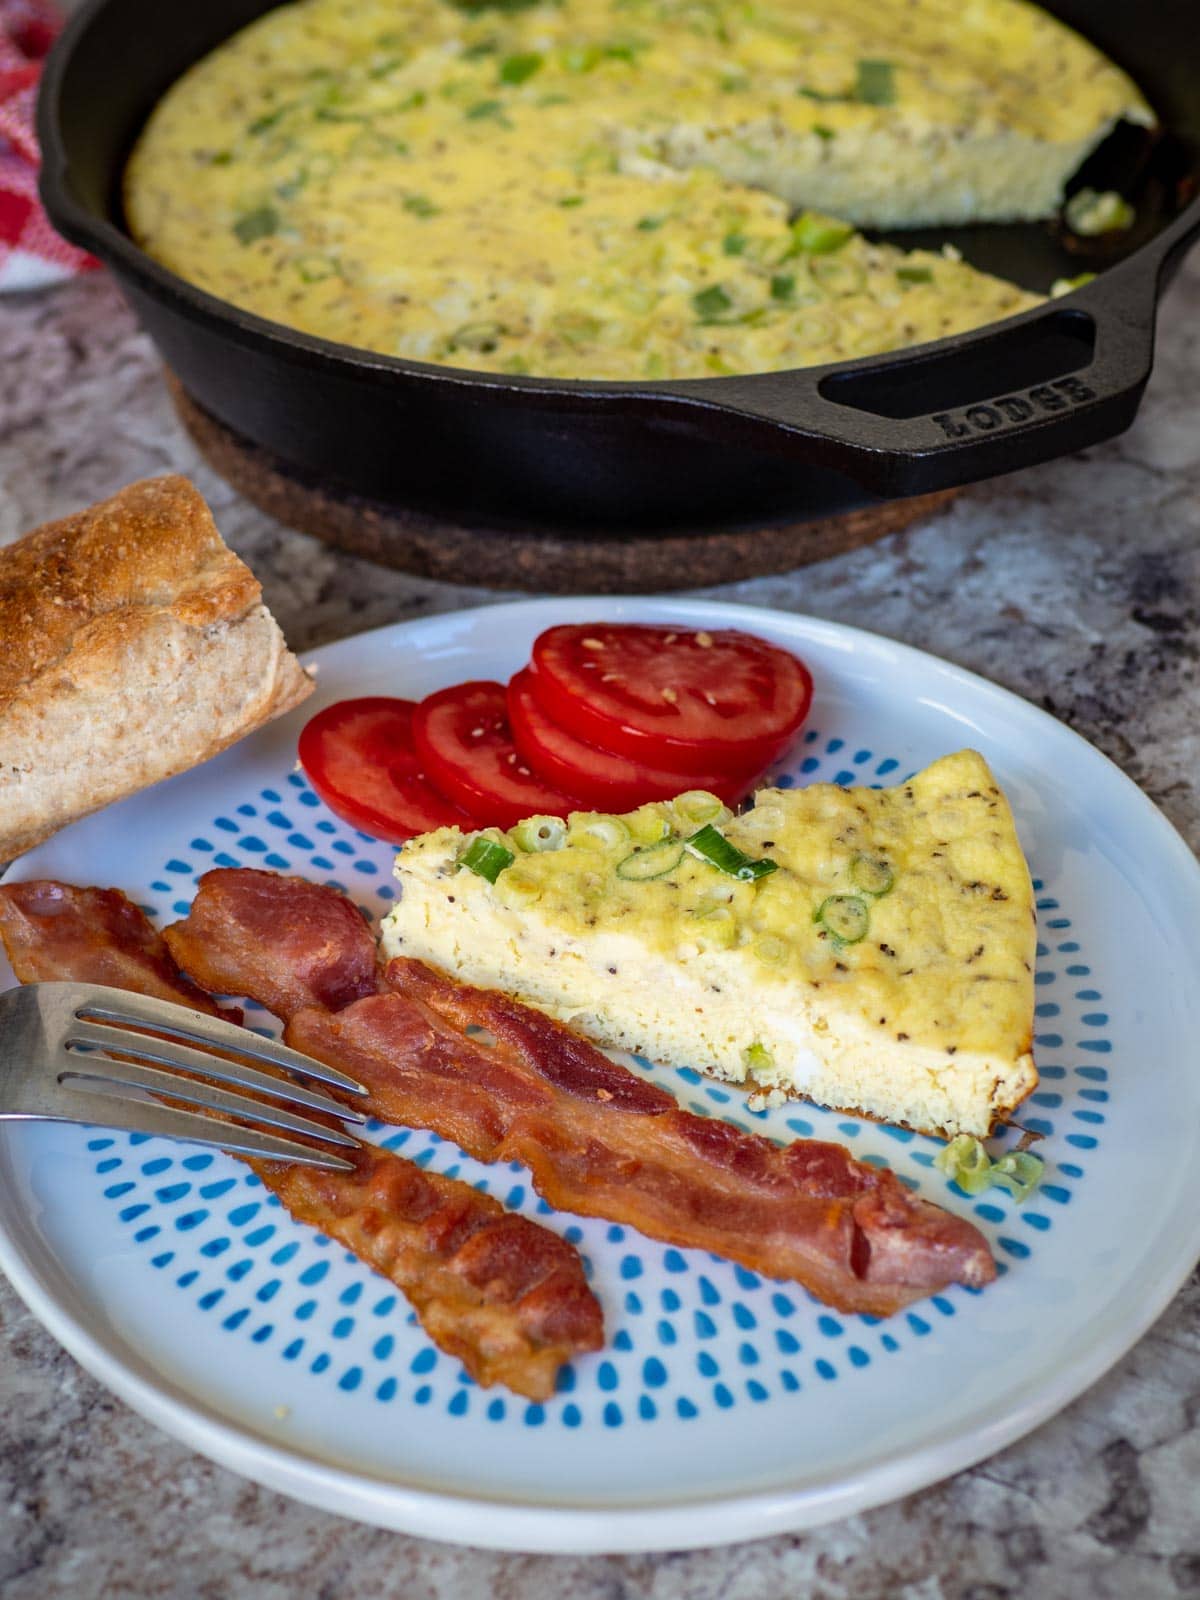 Frittata on a plate with crusty bread, sliced tomato and two strips of bacon.